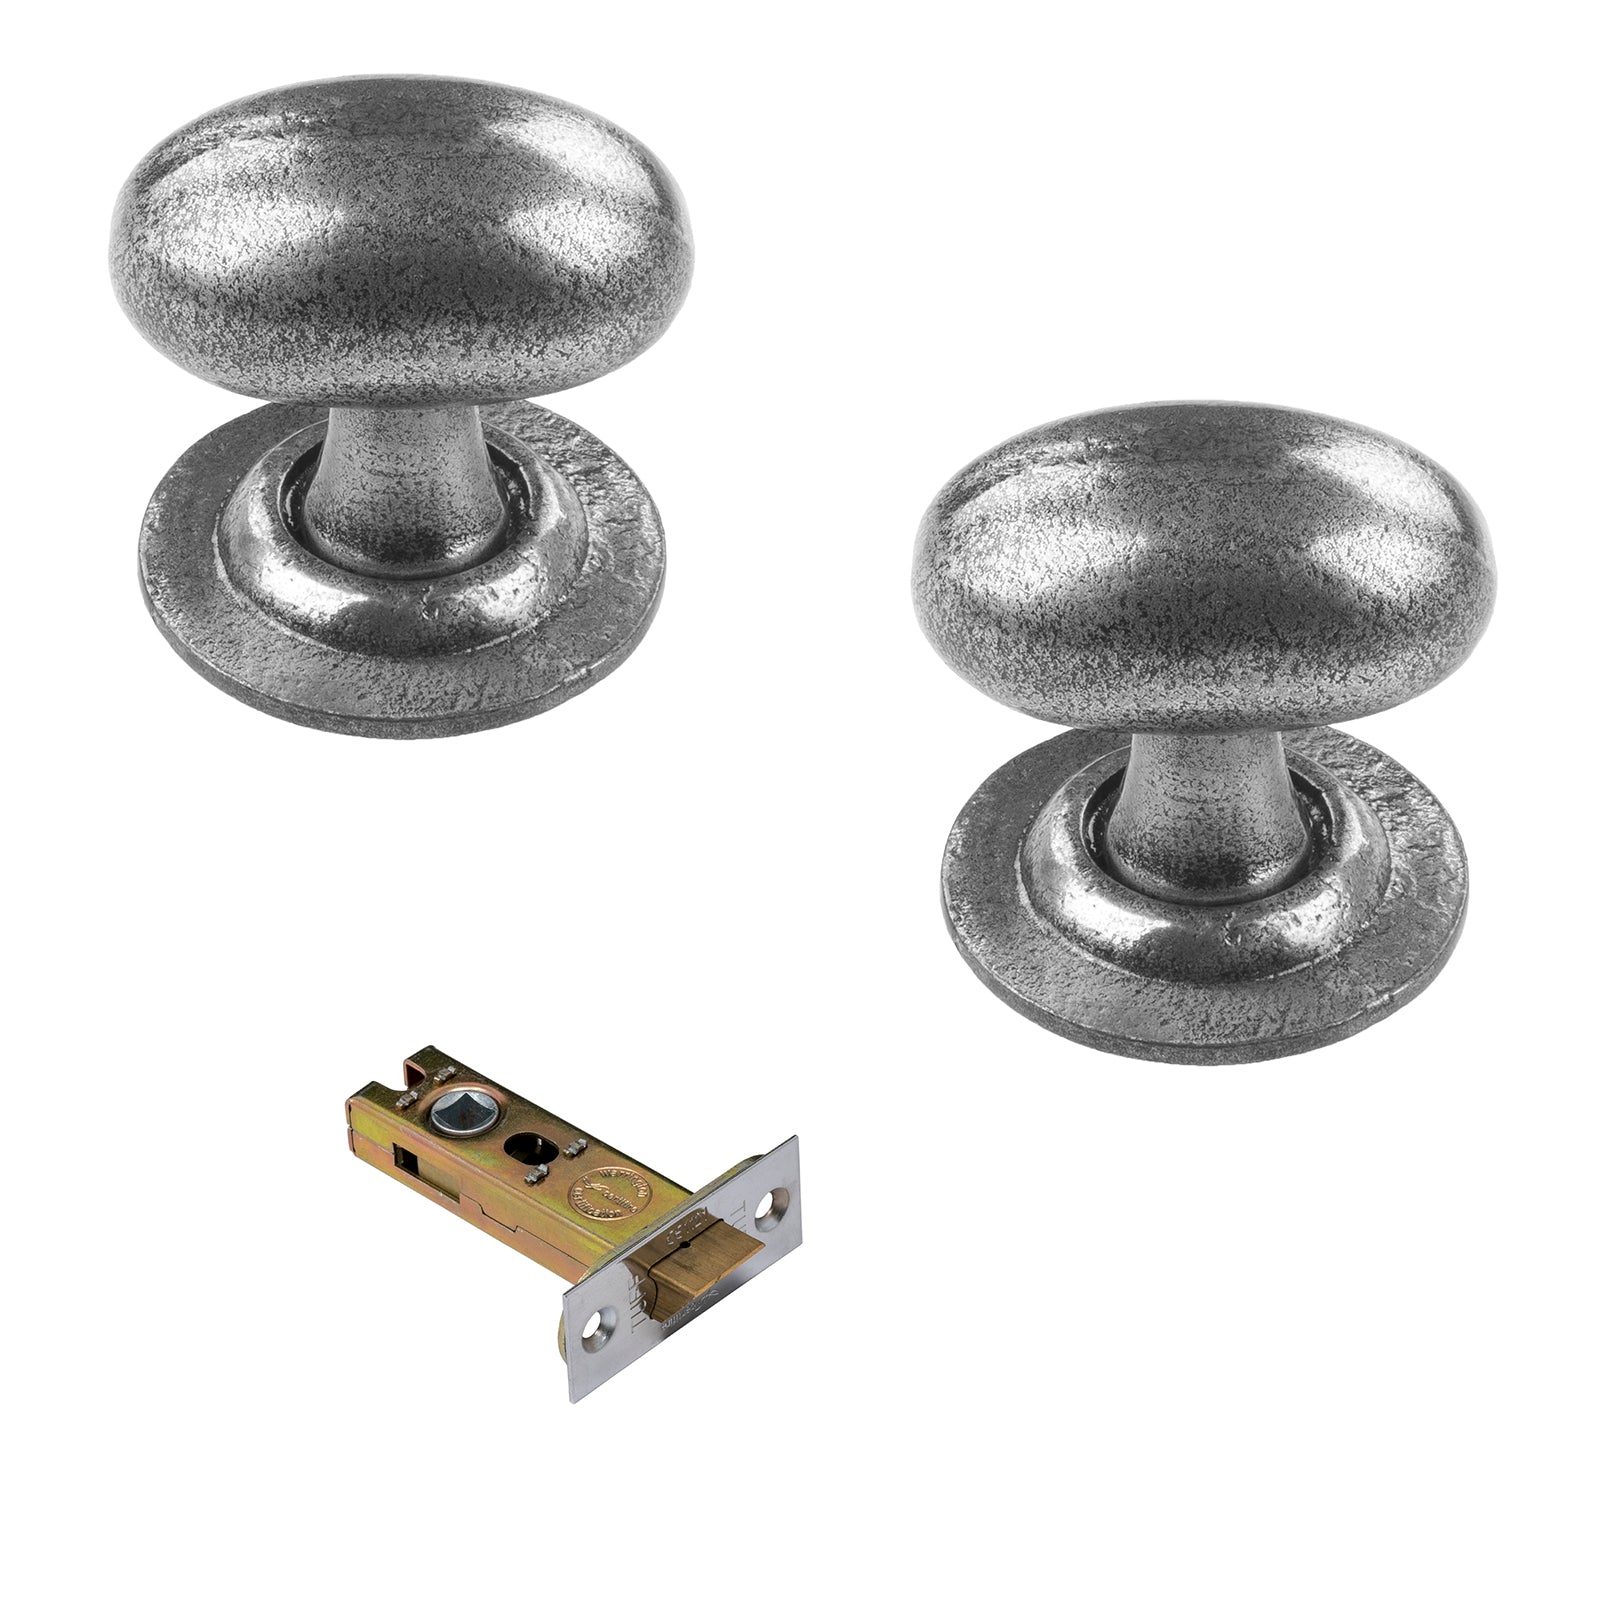 Oval cast iron pewter door knobs 3 inch latch set